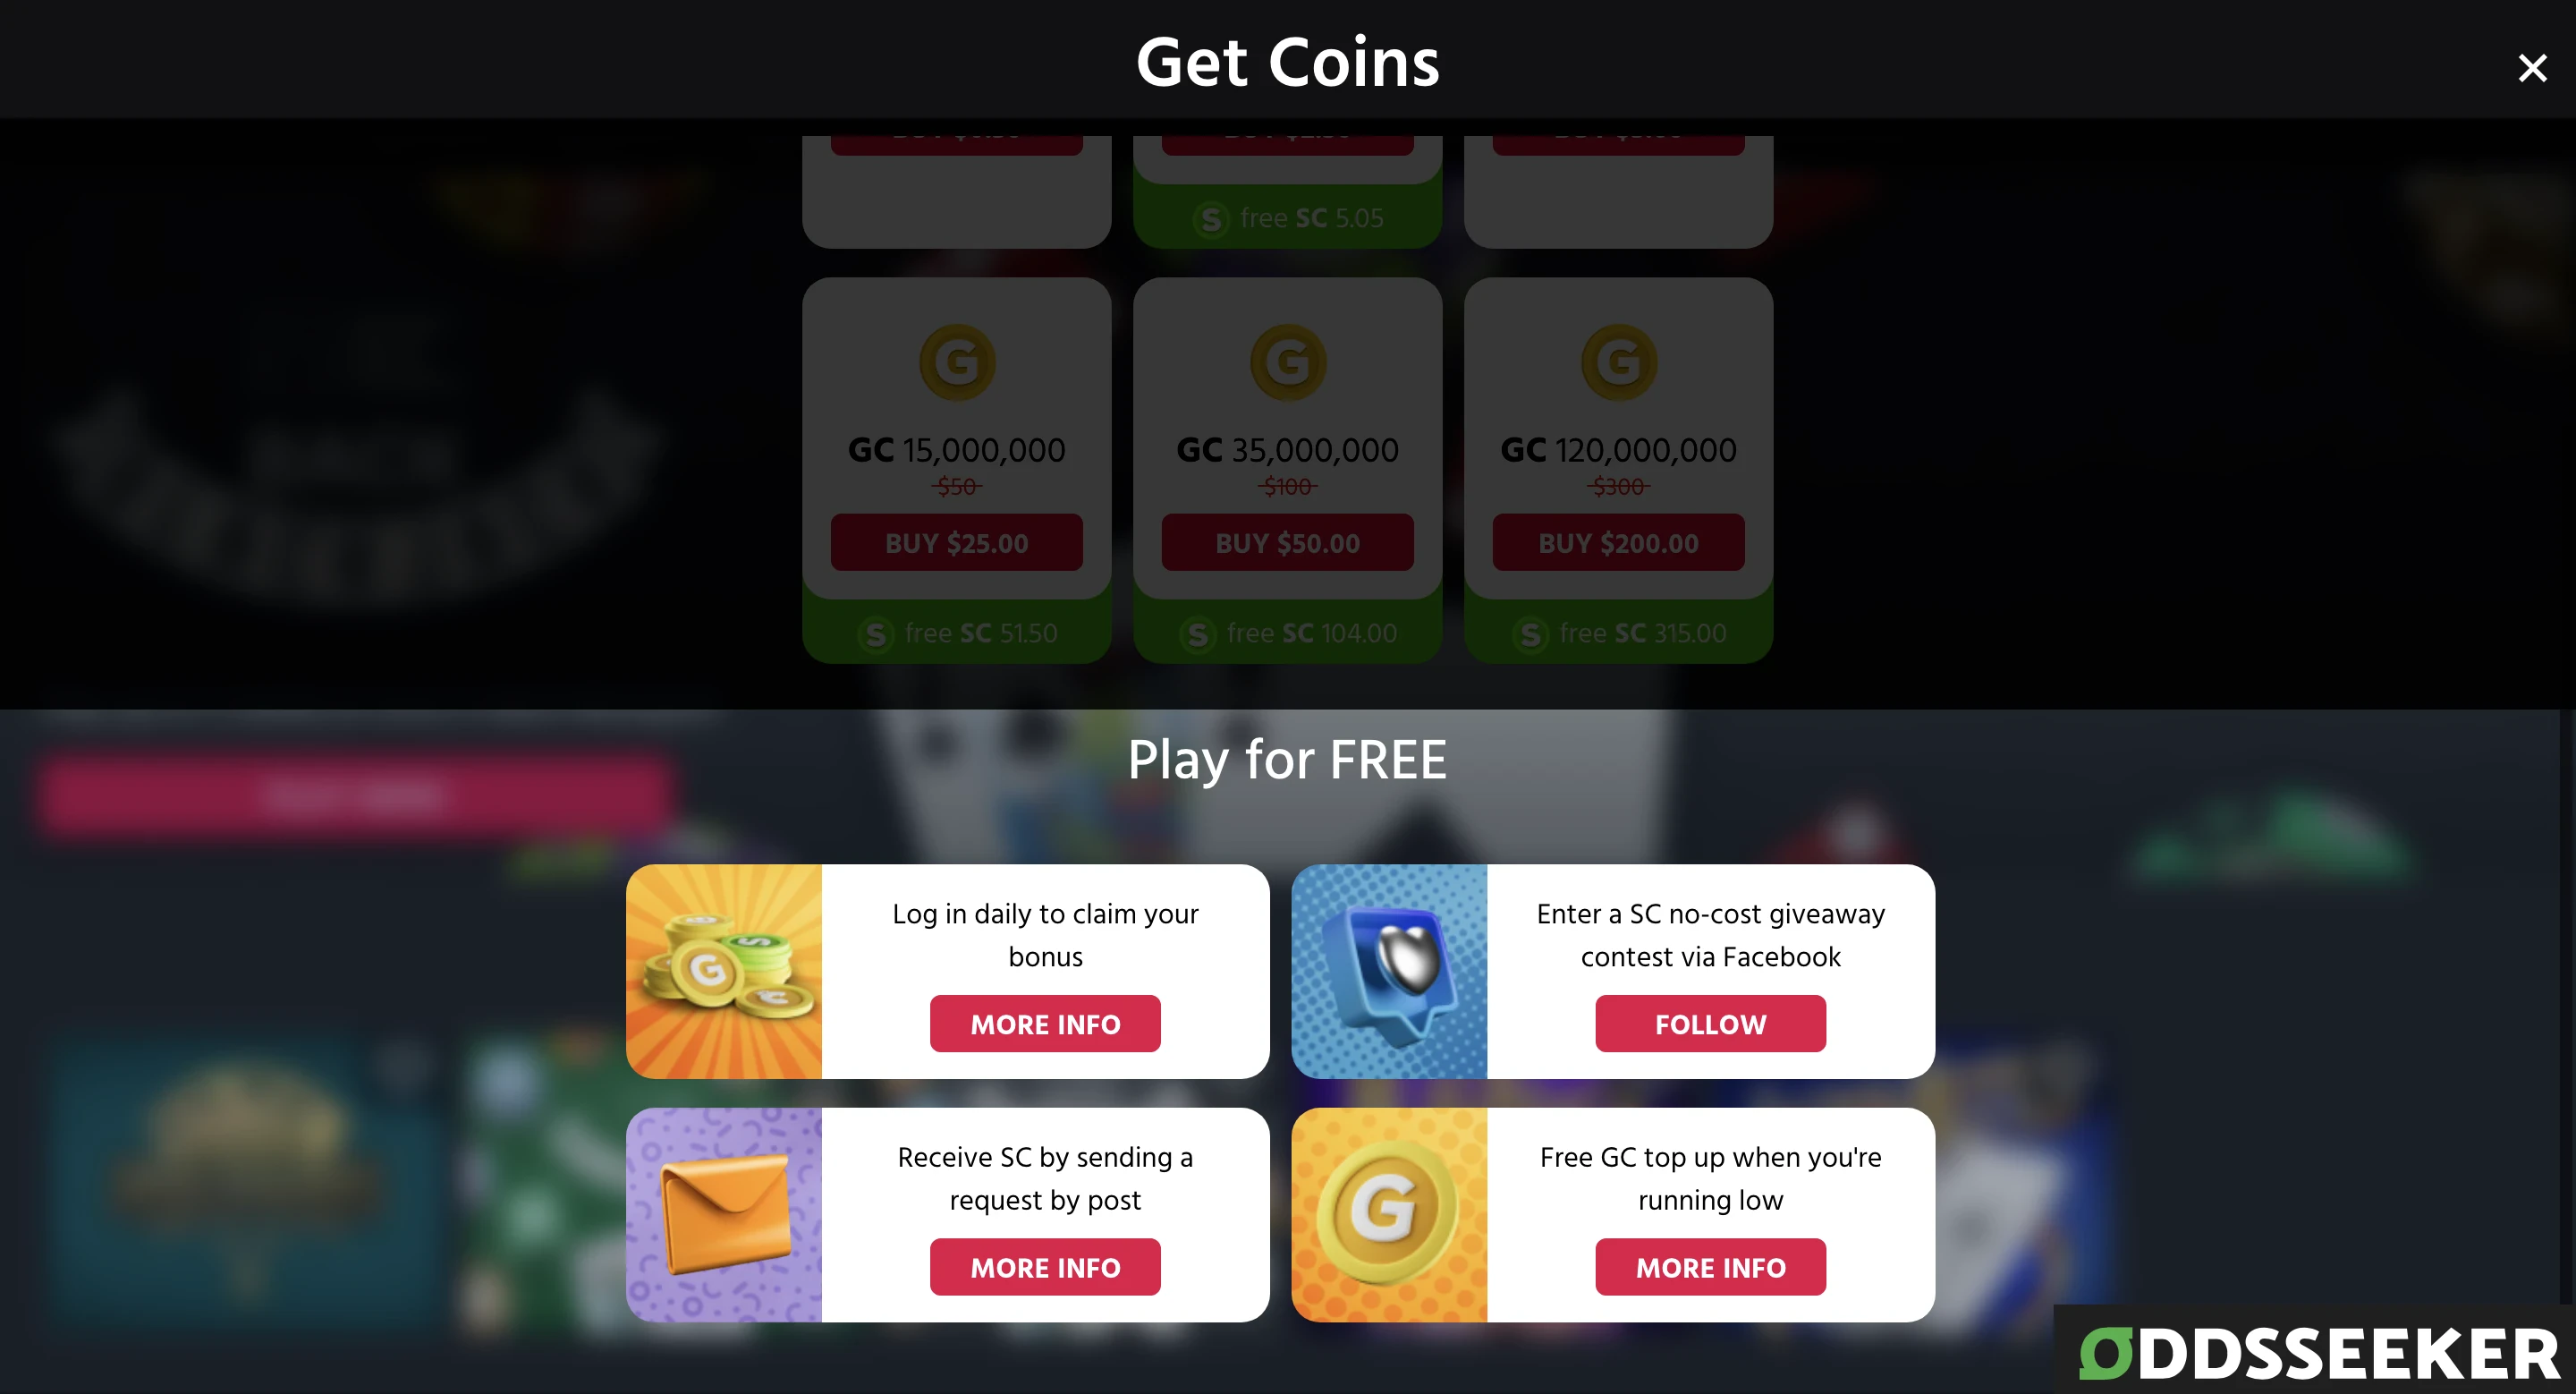 Screenshot Chumba Casino Free Coins Page - Daily login bonus, request by mail, Facebook giveaway, free GC top-ups